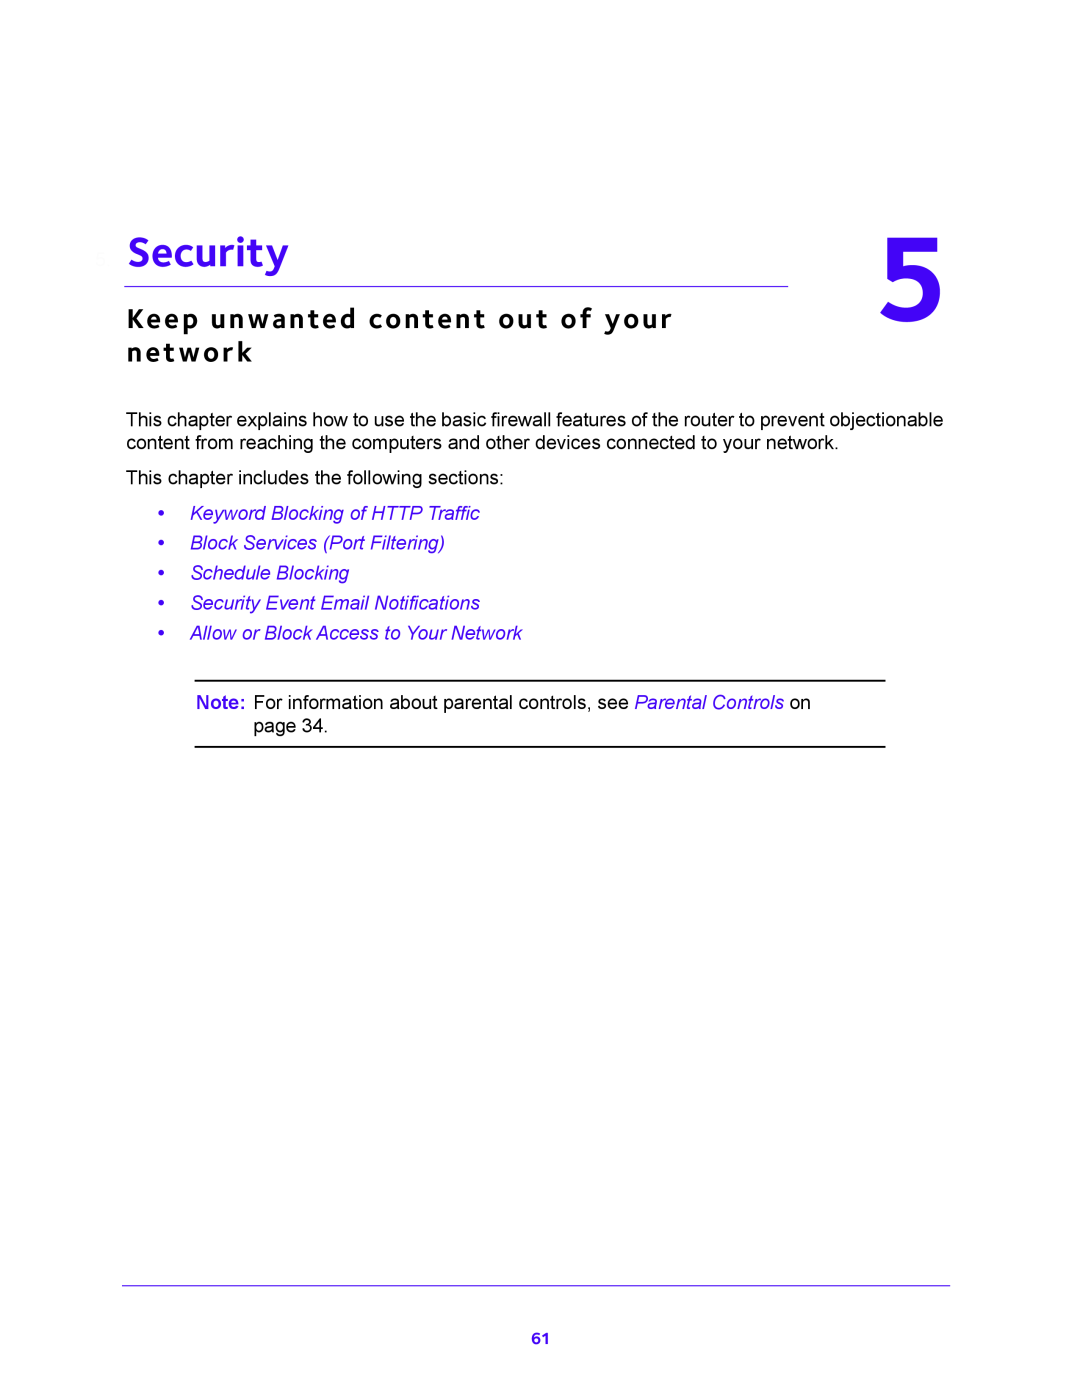 NETGEAR WNR200v4 user manual Security, Keep unwanted content out of your, network, Allow or Block Access to Your Network 